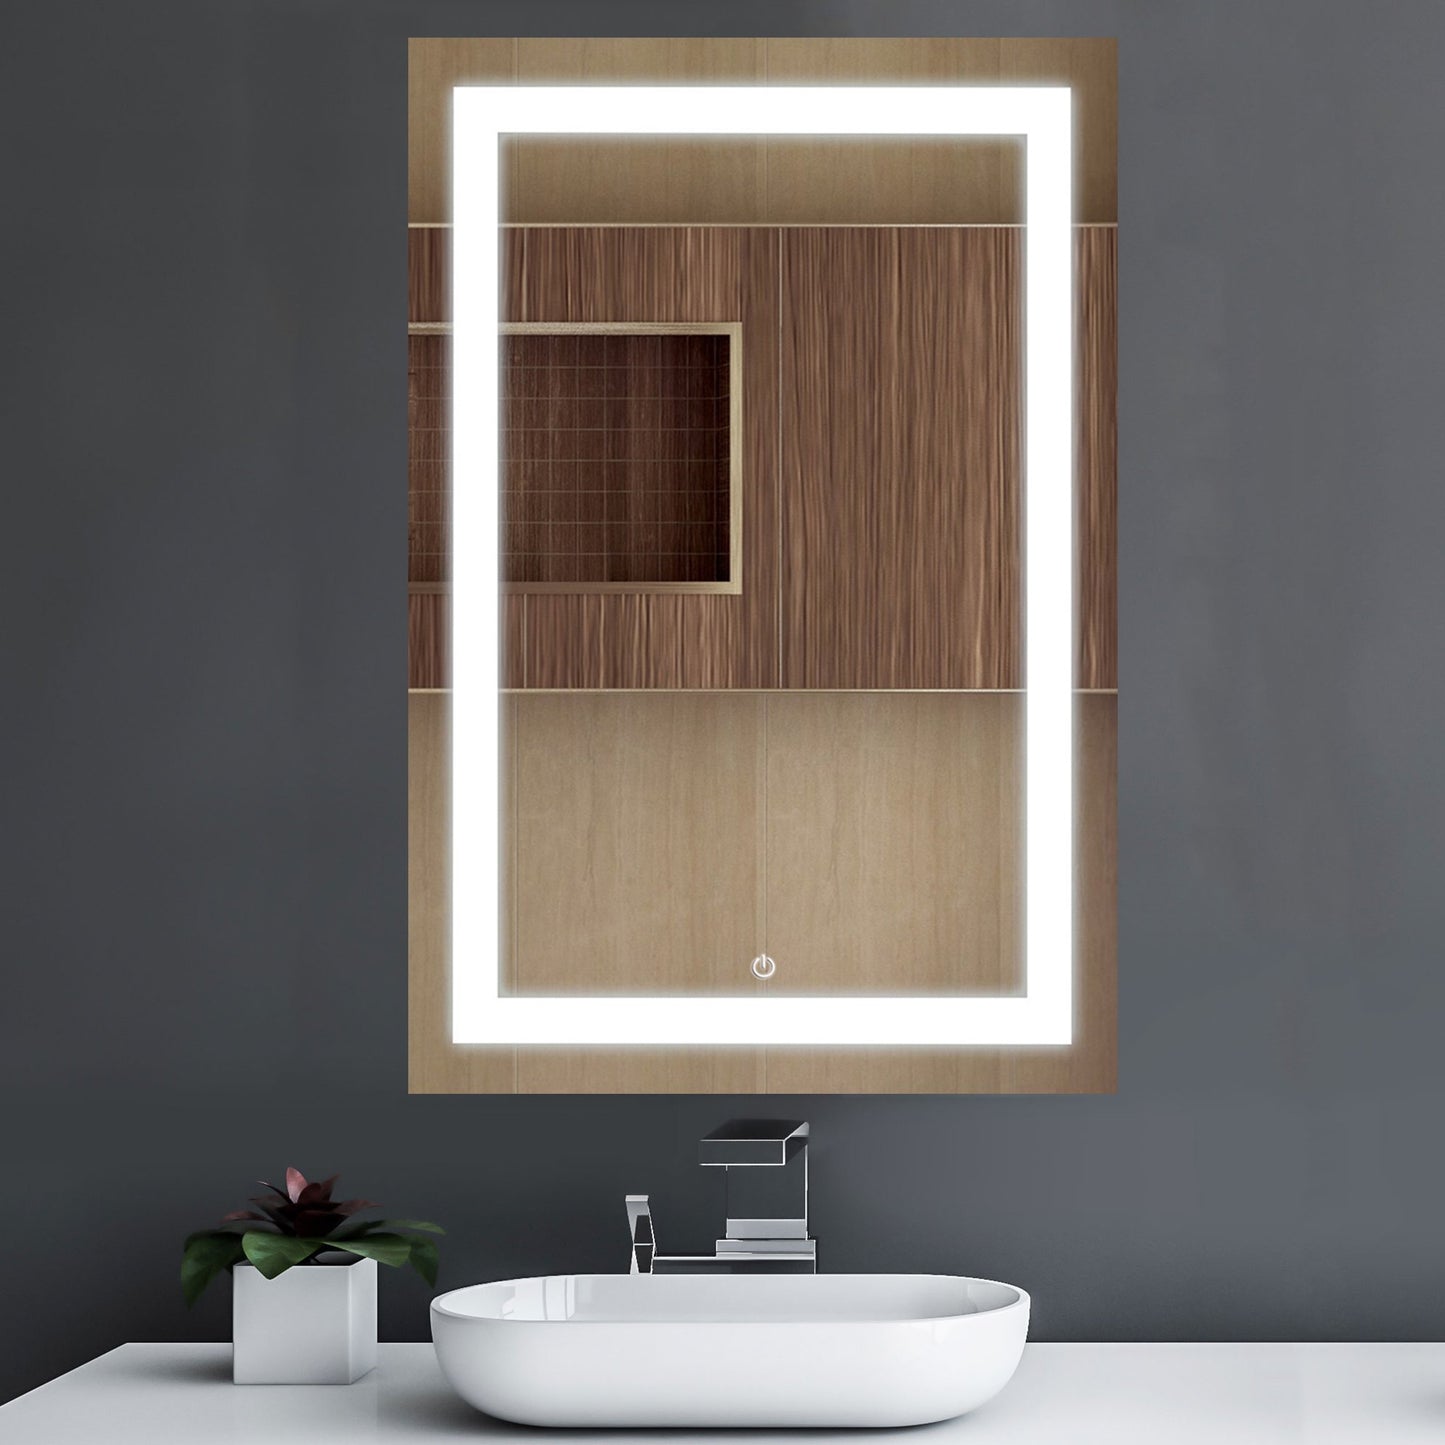 led-bathroom-lighted-mirror-24-inch-x-36-inch-and-lighted-vanity-mirror